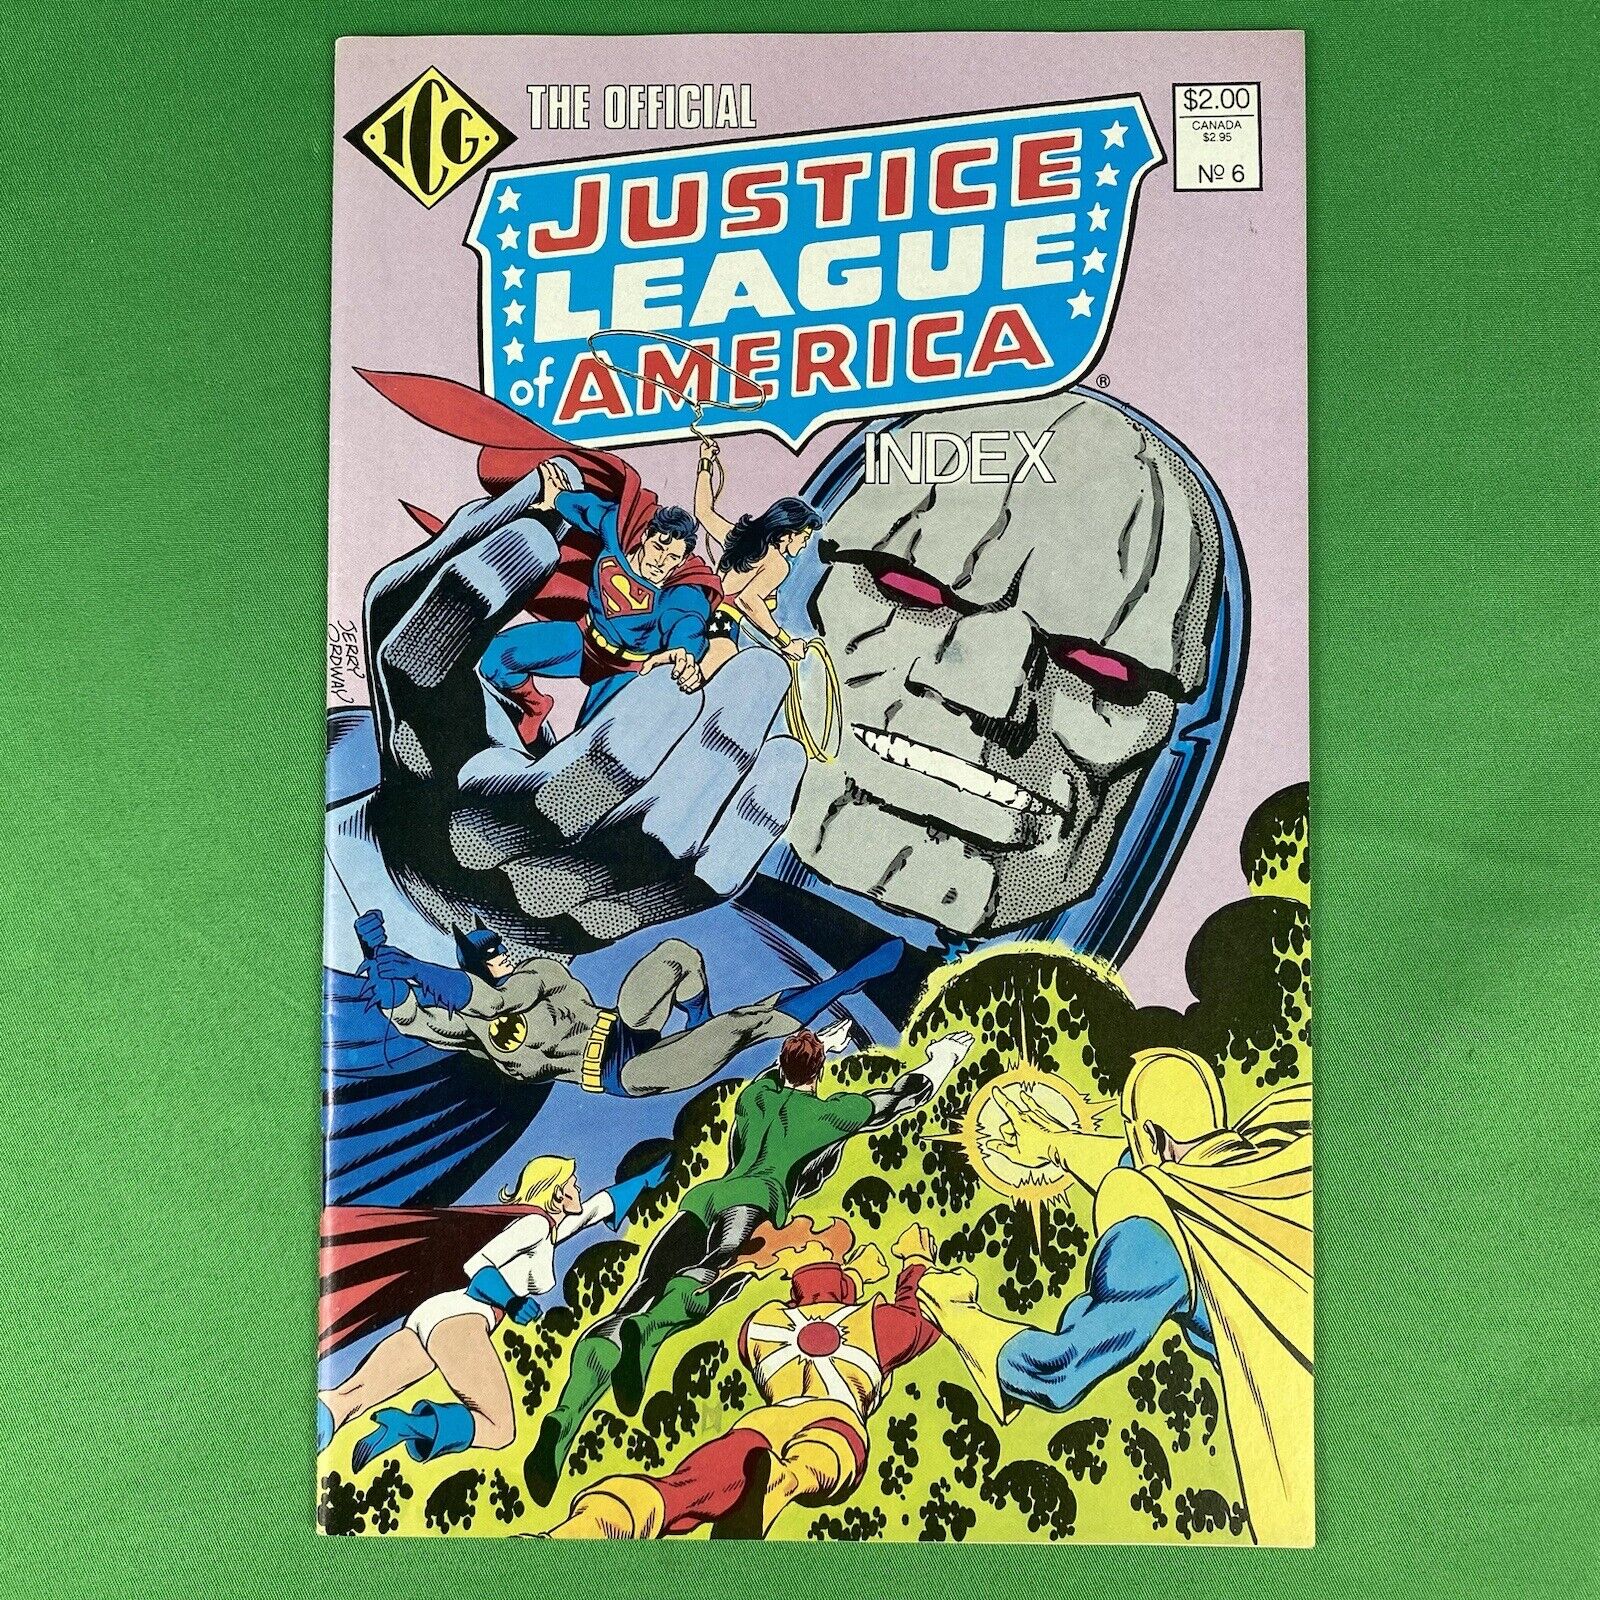 The Official Justice League of America Index #6 NM ICG 1986 DC Comics Darkseid